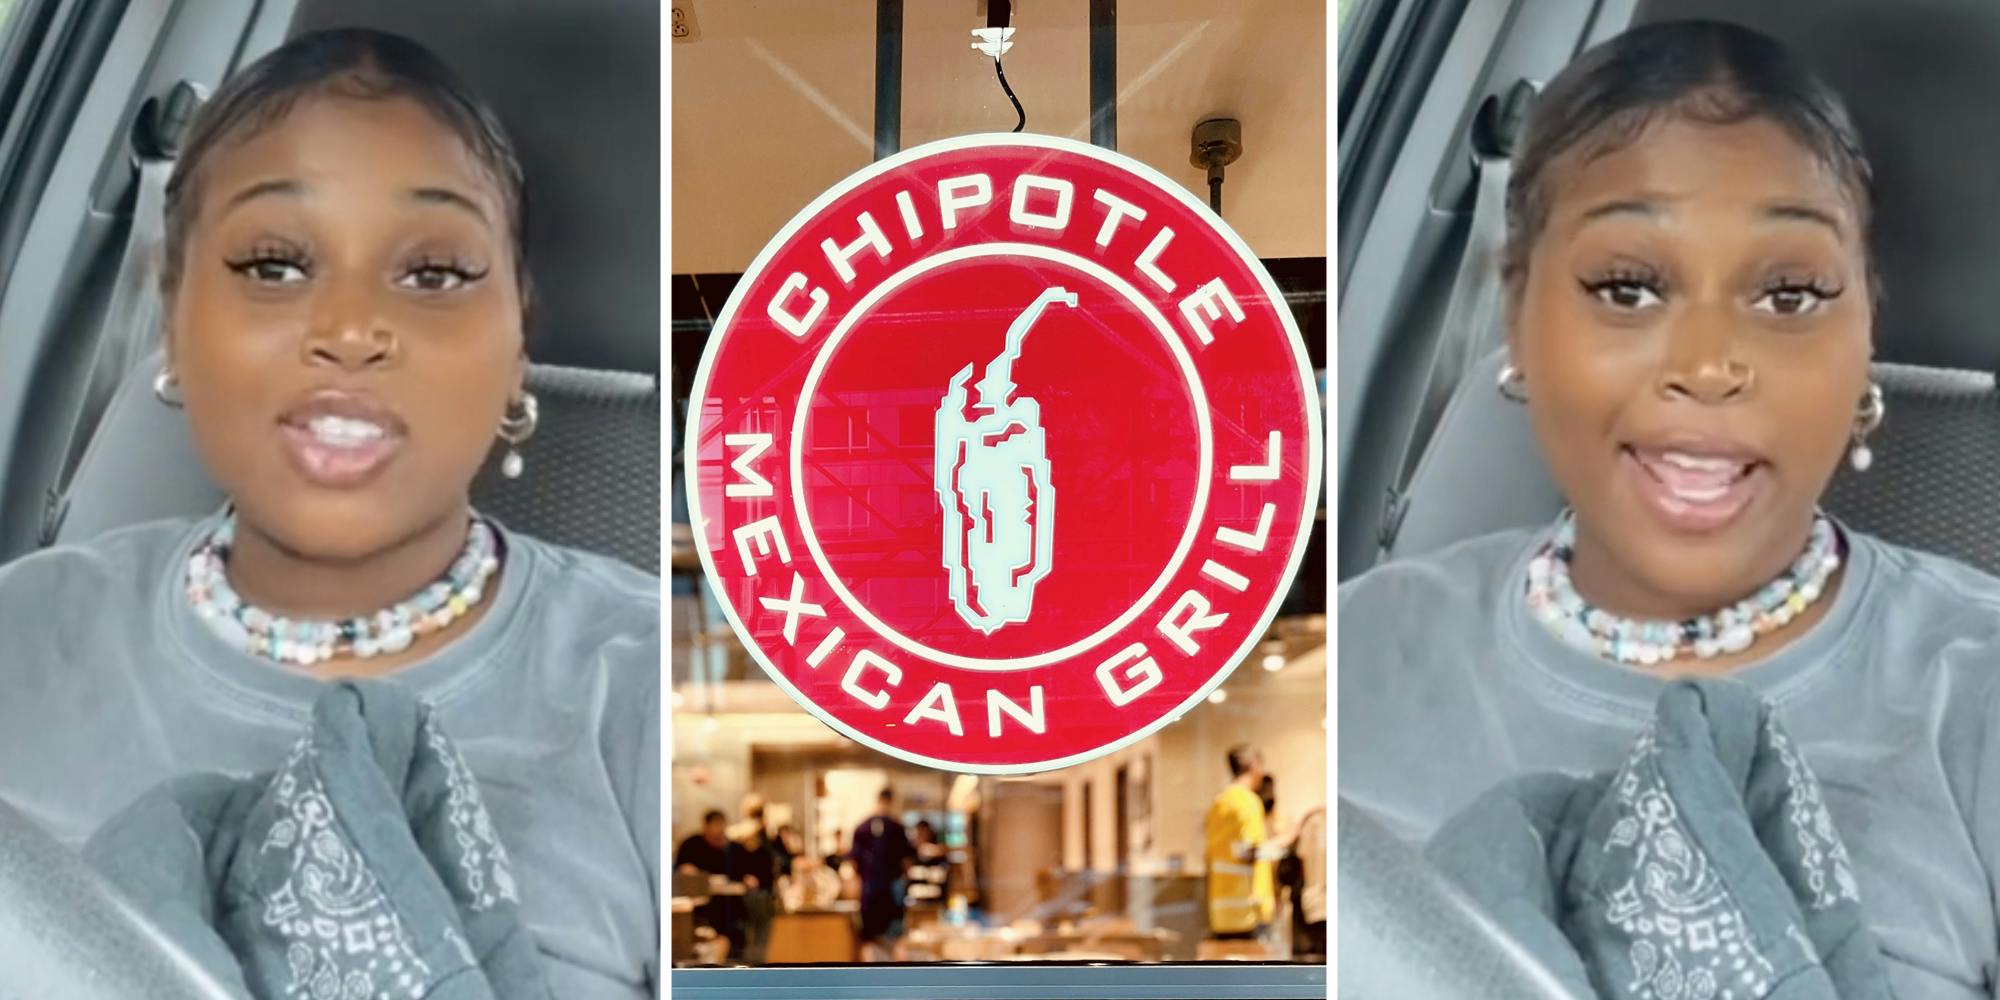 ‘I would’ve left that $35 bowl there’: Chipotle customer says worker tried to charge her for ‘quadruple chicken’ after she only got 2 scoops